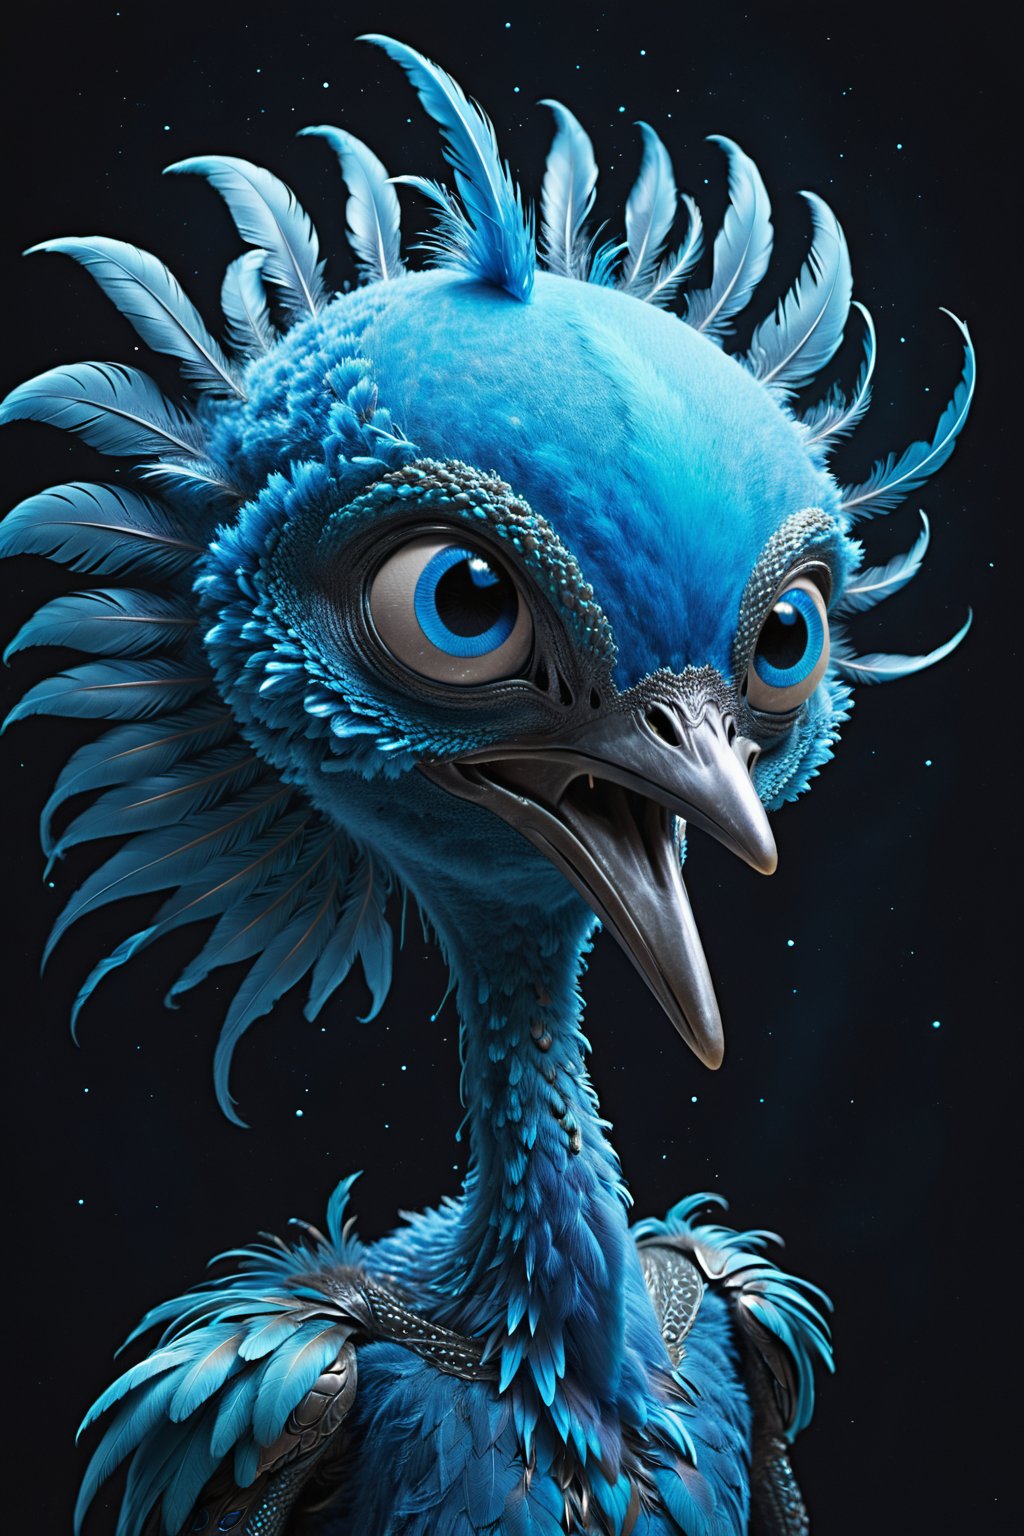 Illustrate Twitter as an alien, with a bird-like appearance and blue feathers that resemble the Twitter logo. The alien should have a beak that looks like it's tweeting, with tiny retweet symbols as wings